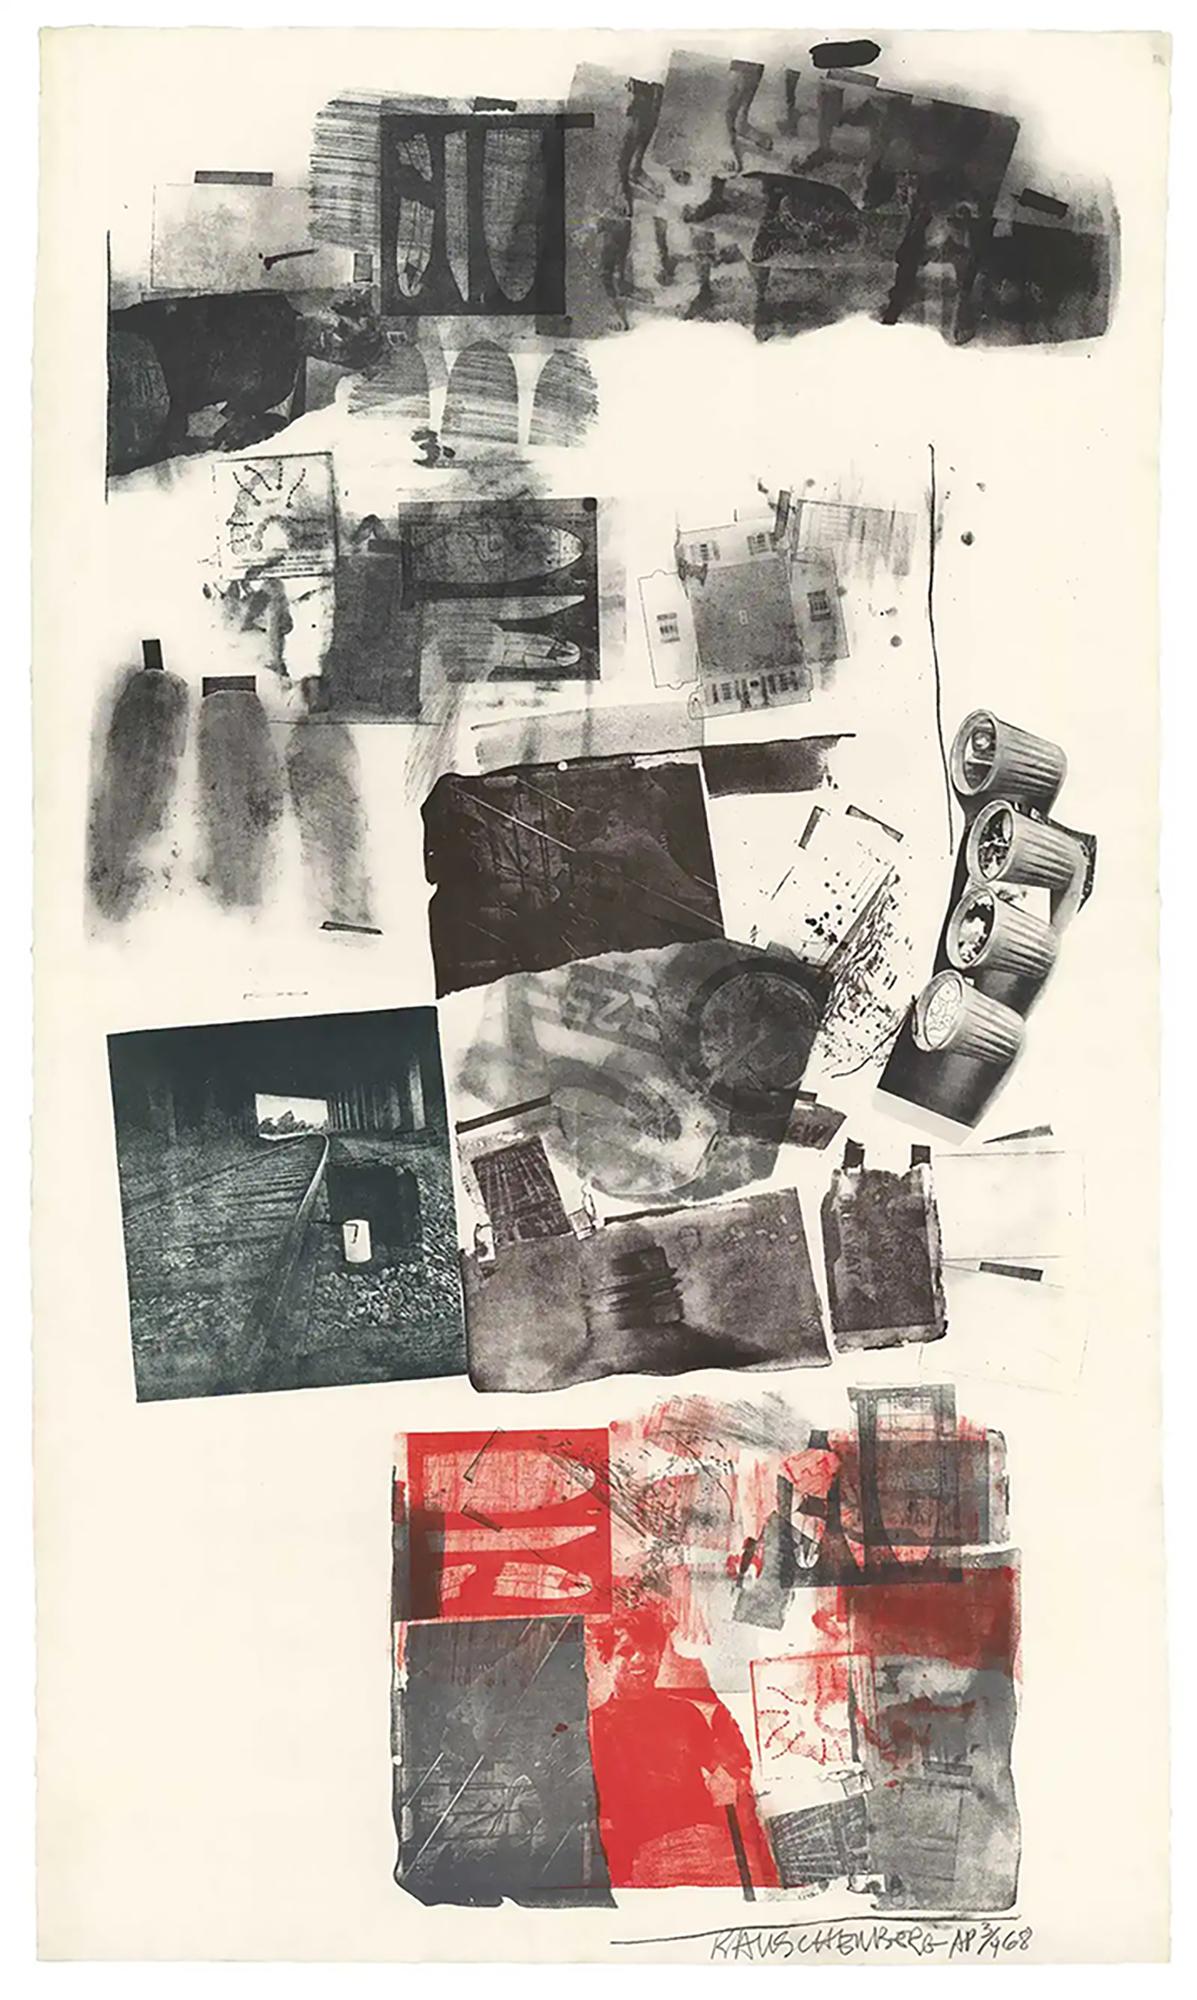 What was Robert Rauschenberg famous for?